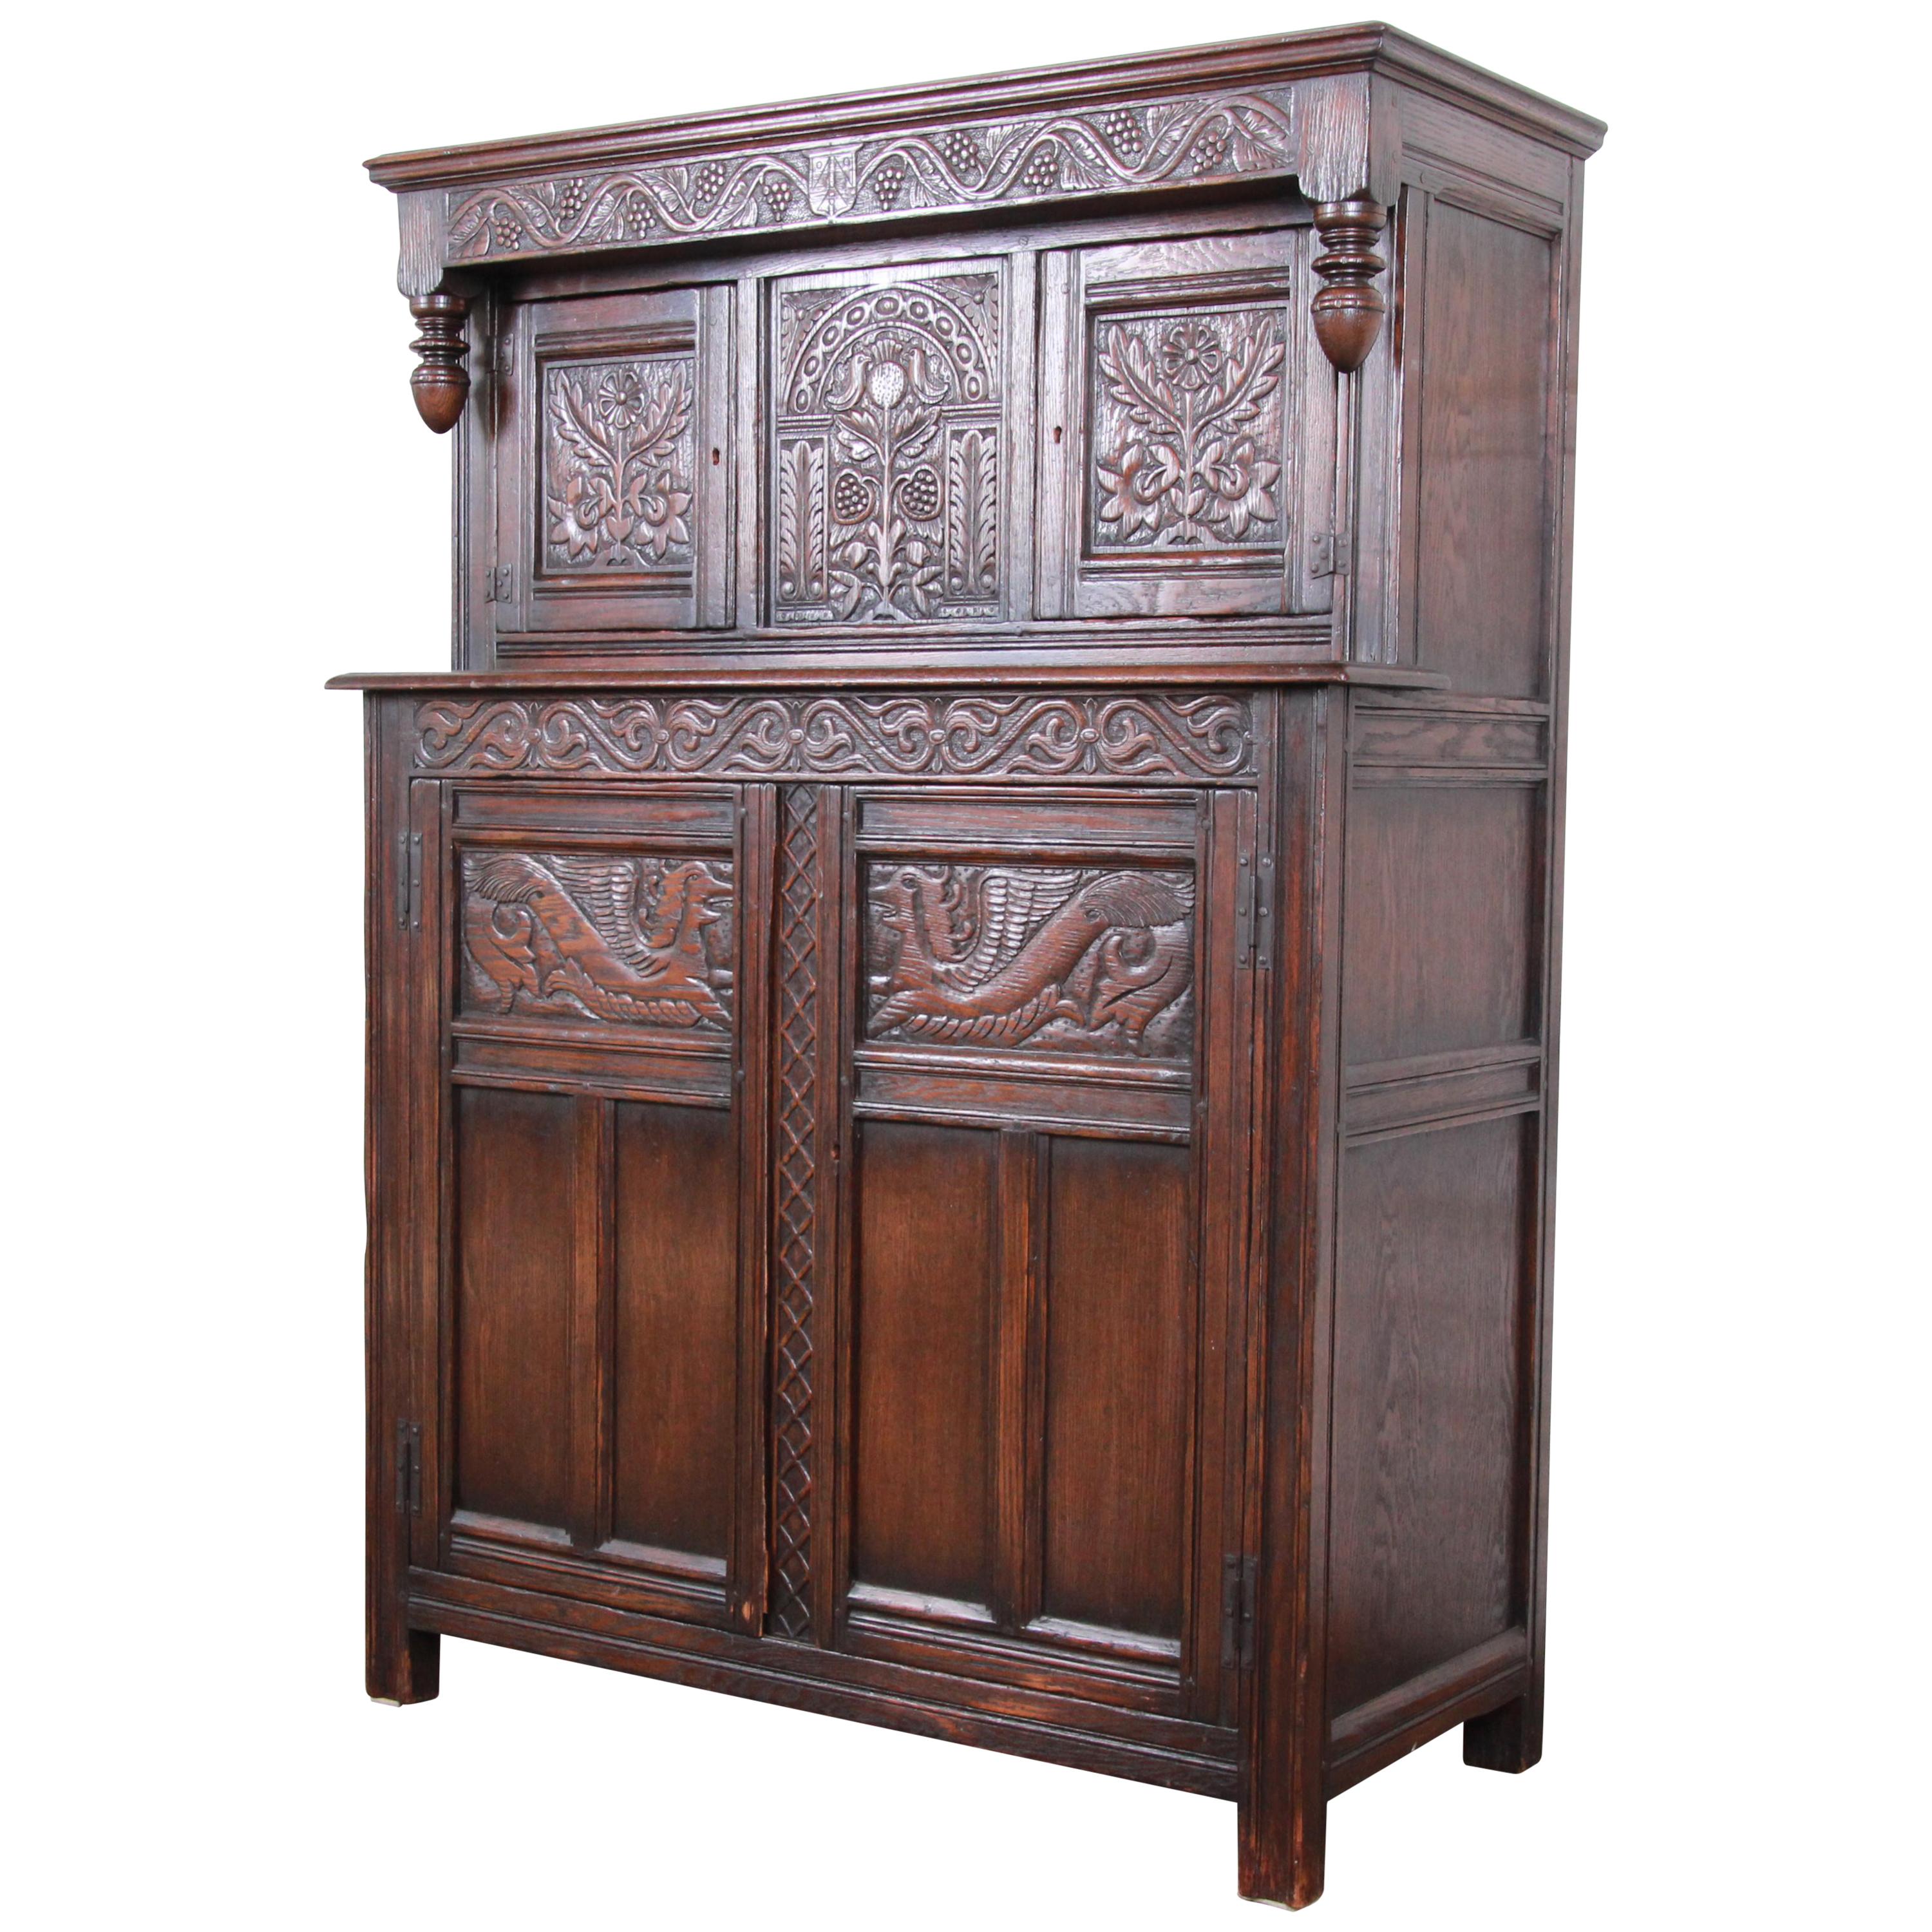 Antique Carved Oak Bar Cabinet by Kensington of New York, circa 1920s